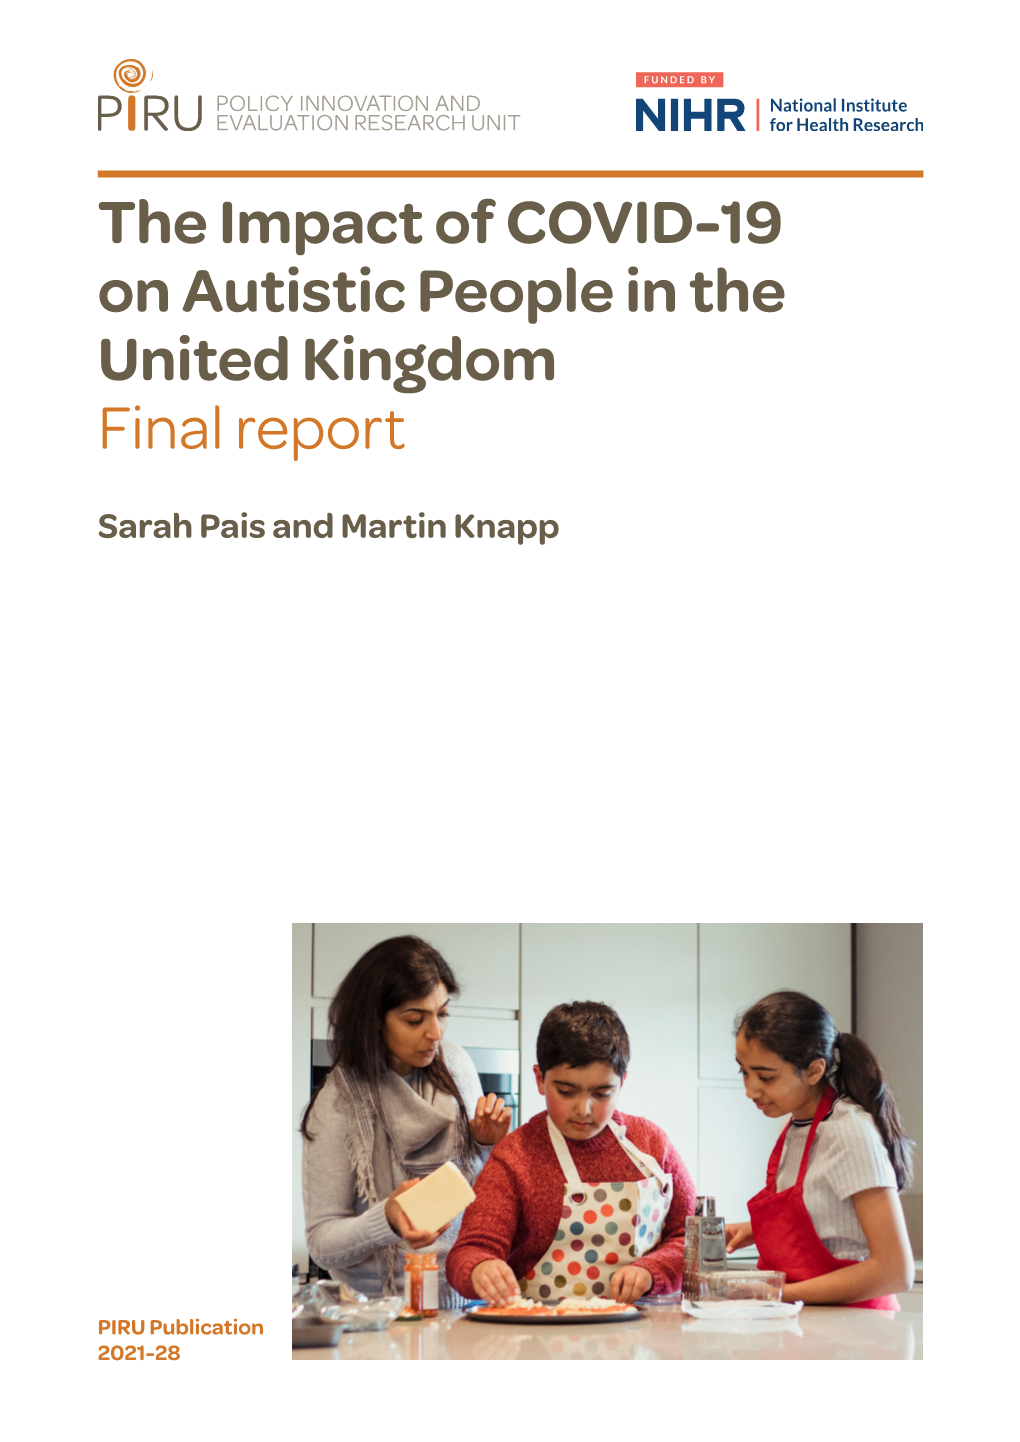 The Impact of COVID-19 on Autistic People in the United Kingdom Final Report